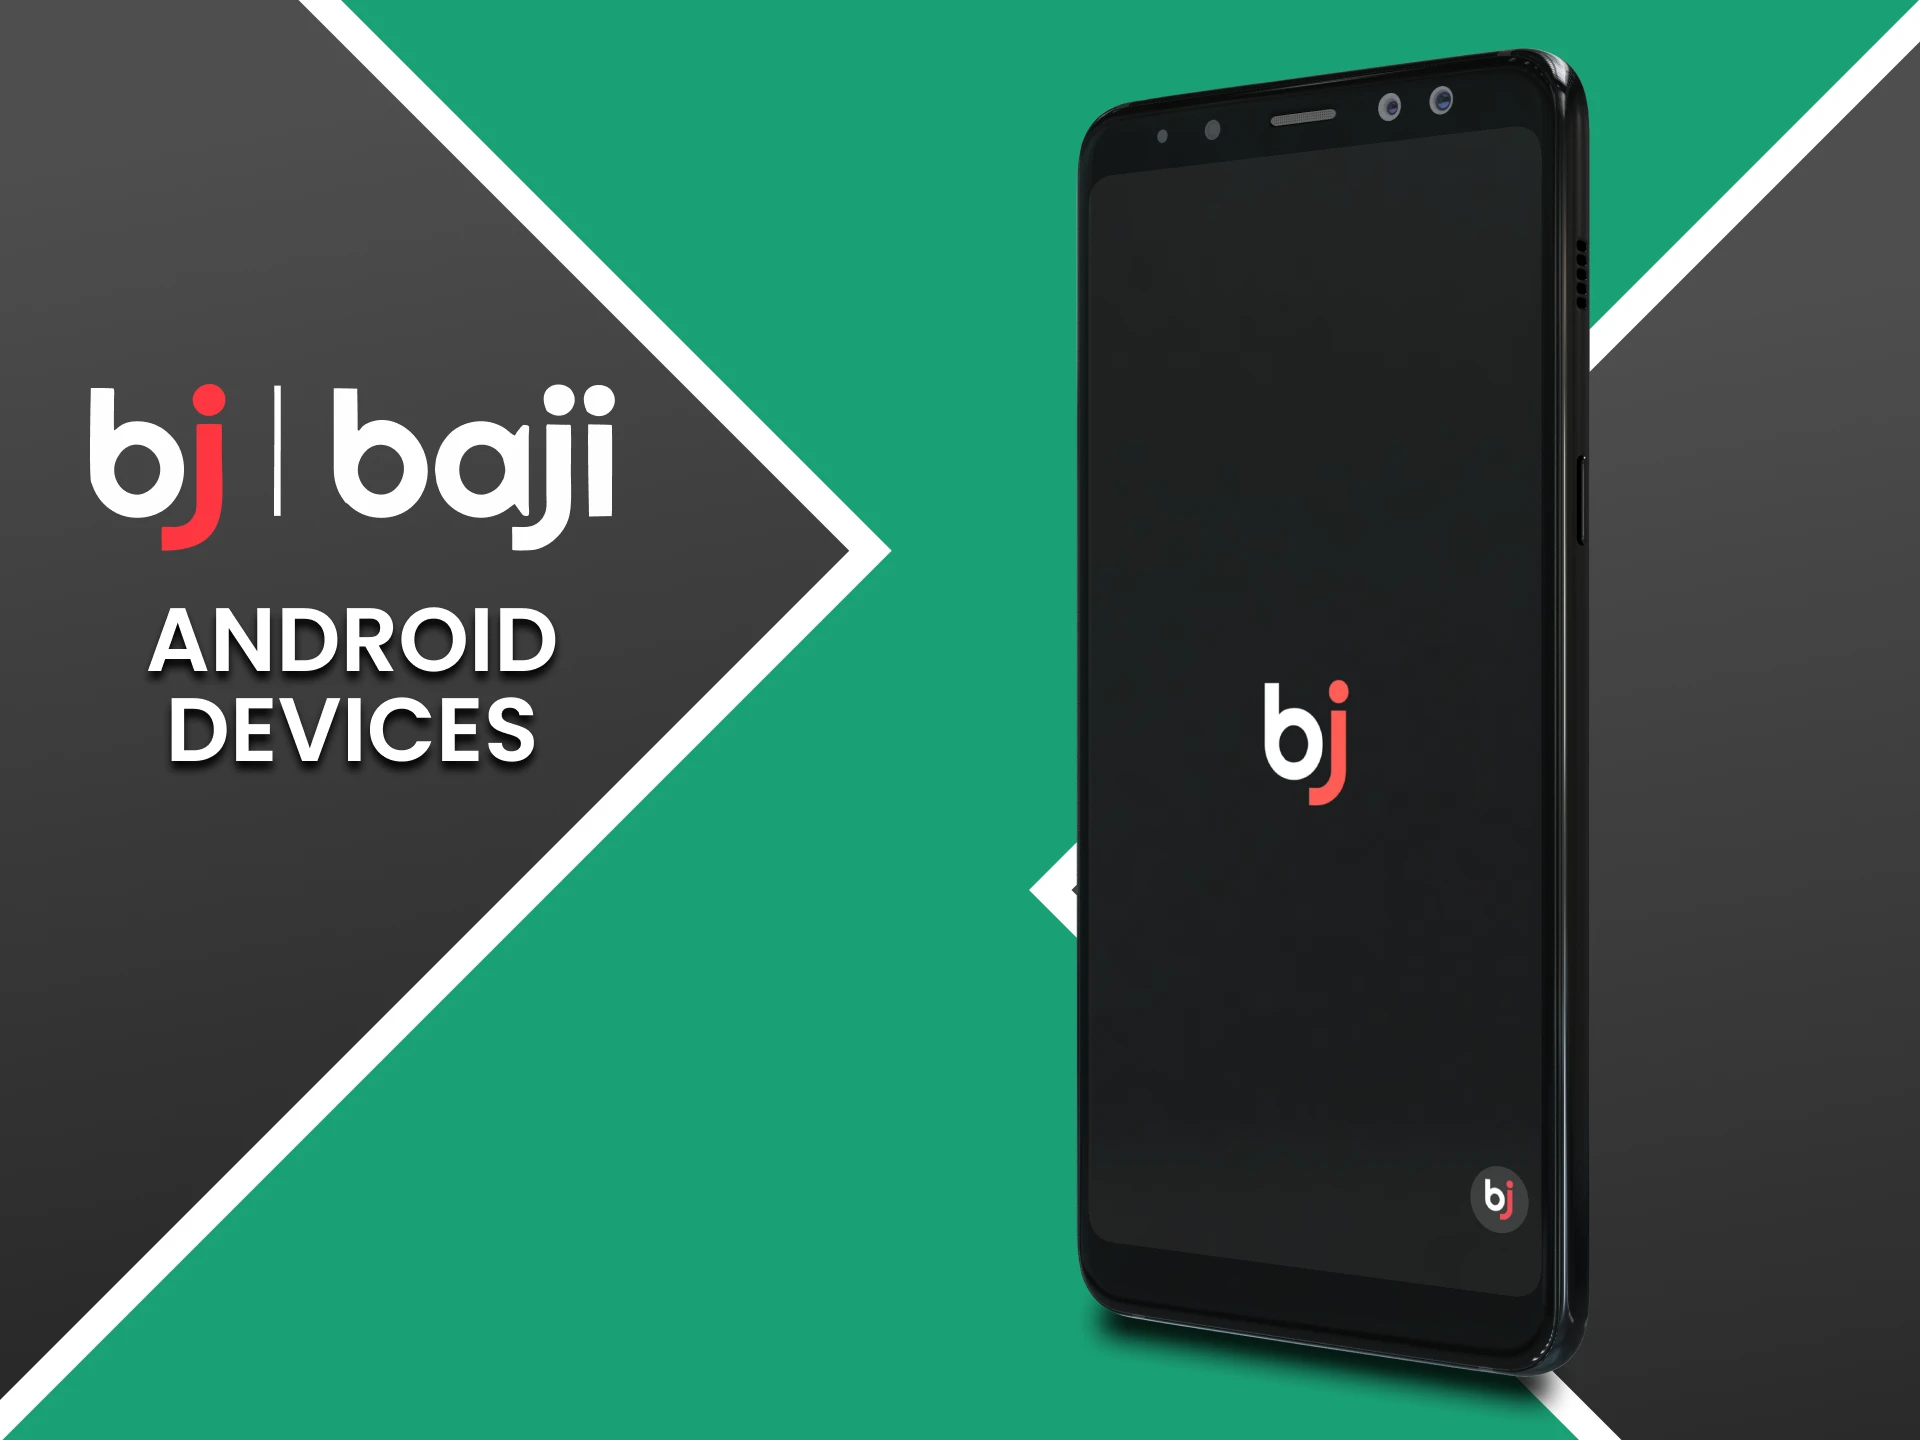 Android devices supported by the online Baji app. Check your gadget for compliance.